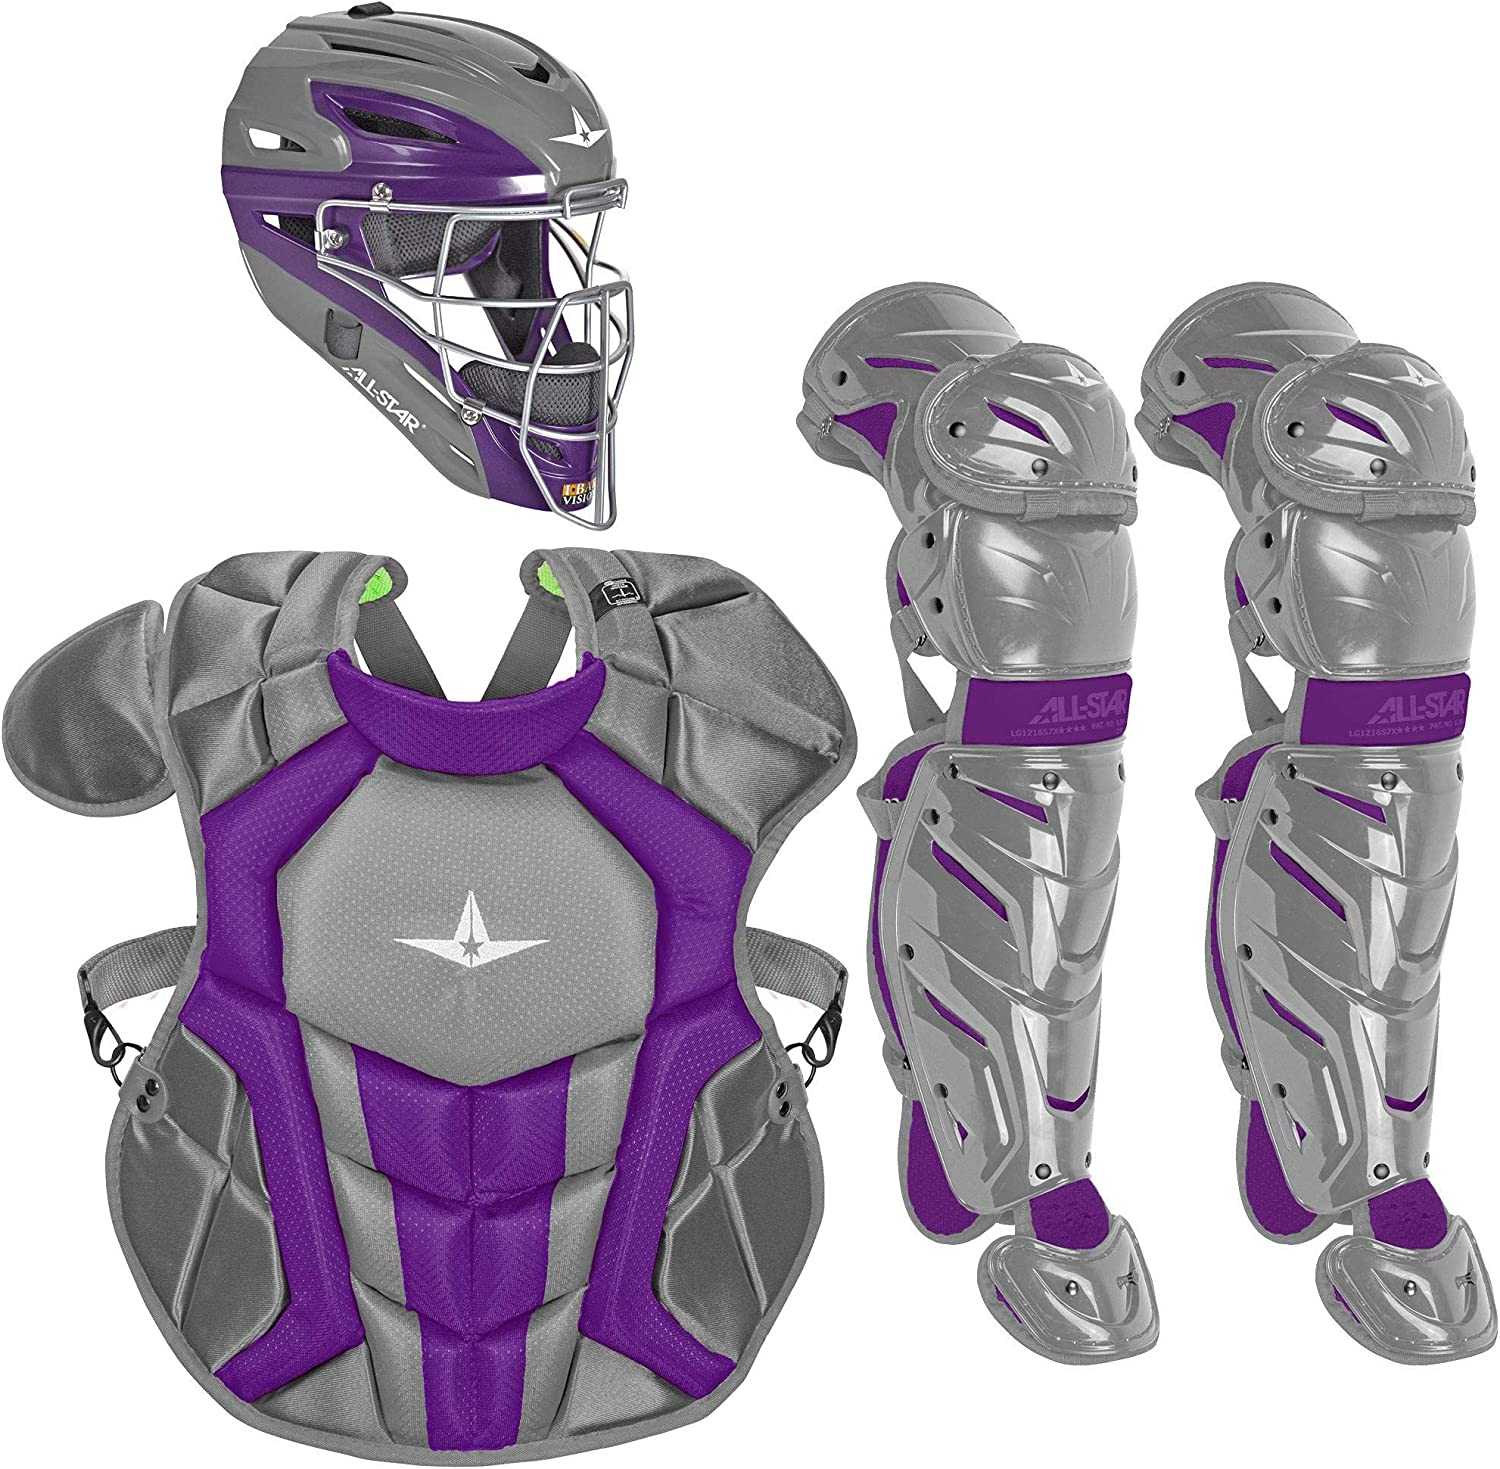 All-Star System 7 Certified NOCSAE Young Pro Catcher's Set (Ages 12-16) - Graphite Purple" - "HIT a Double